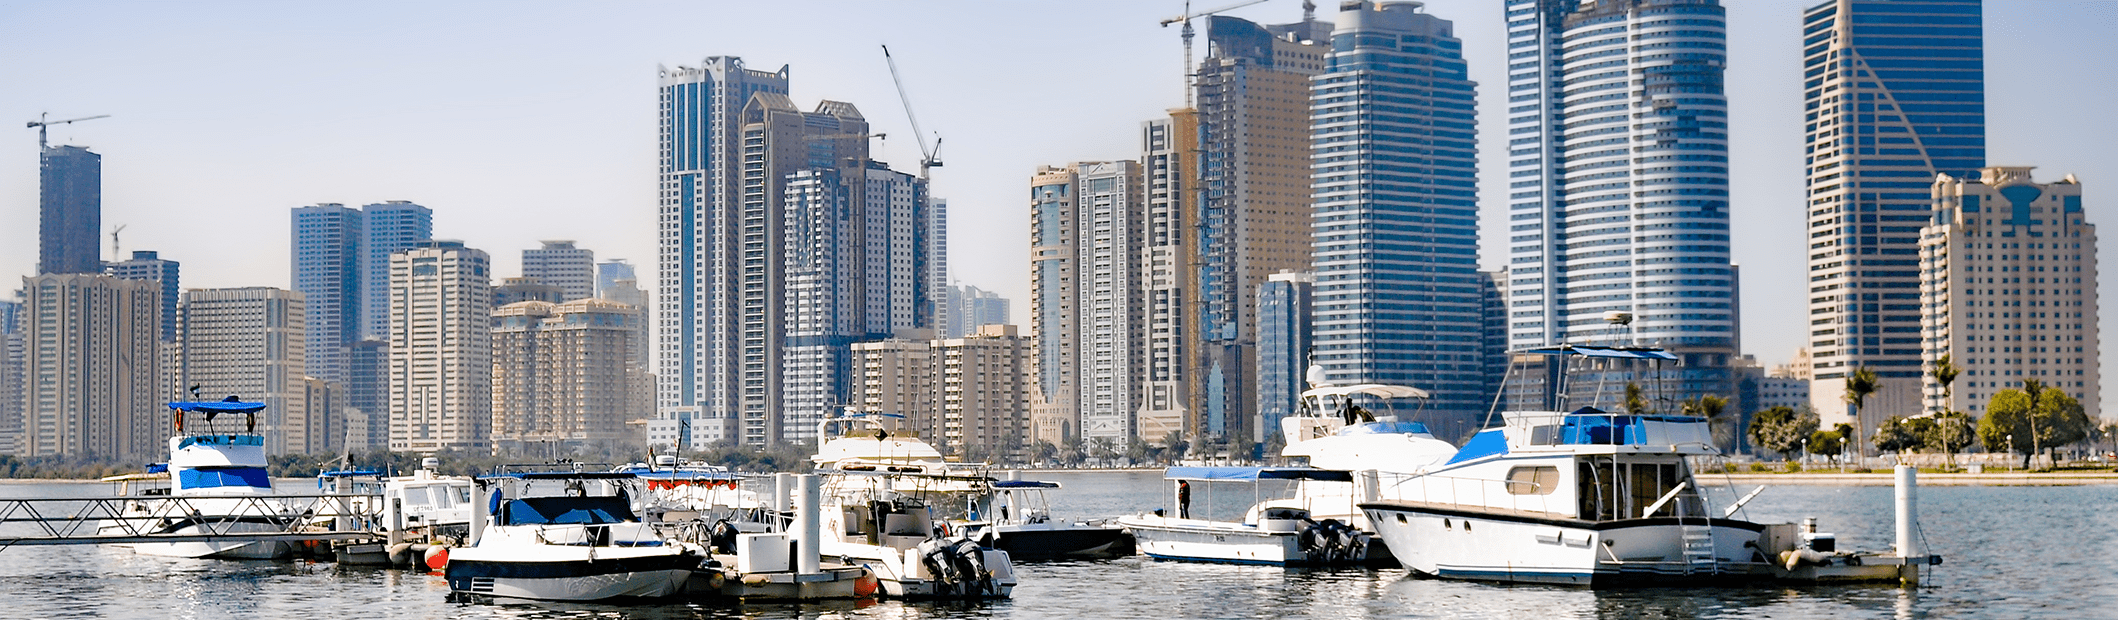 Hotelier Middle East: Market update – Sharjah, the Culture Capital